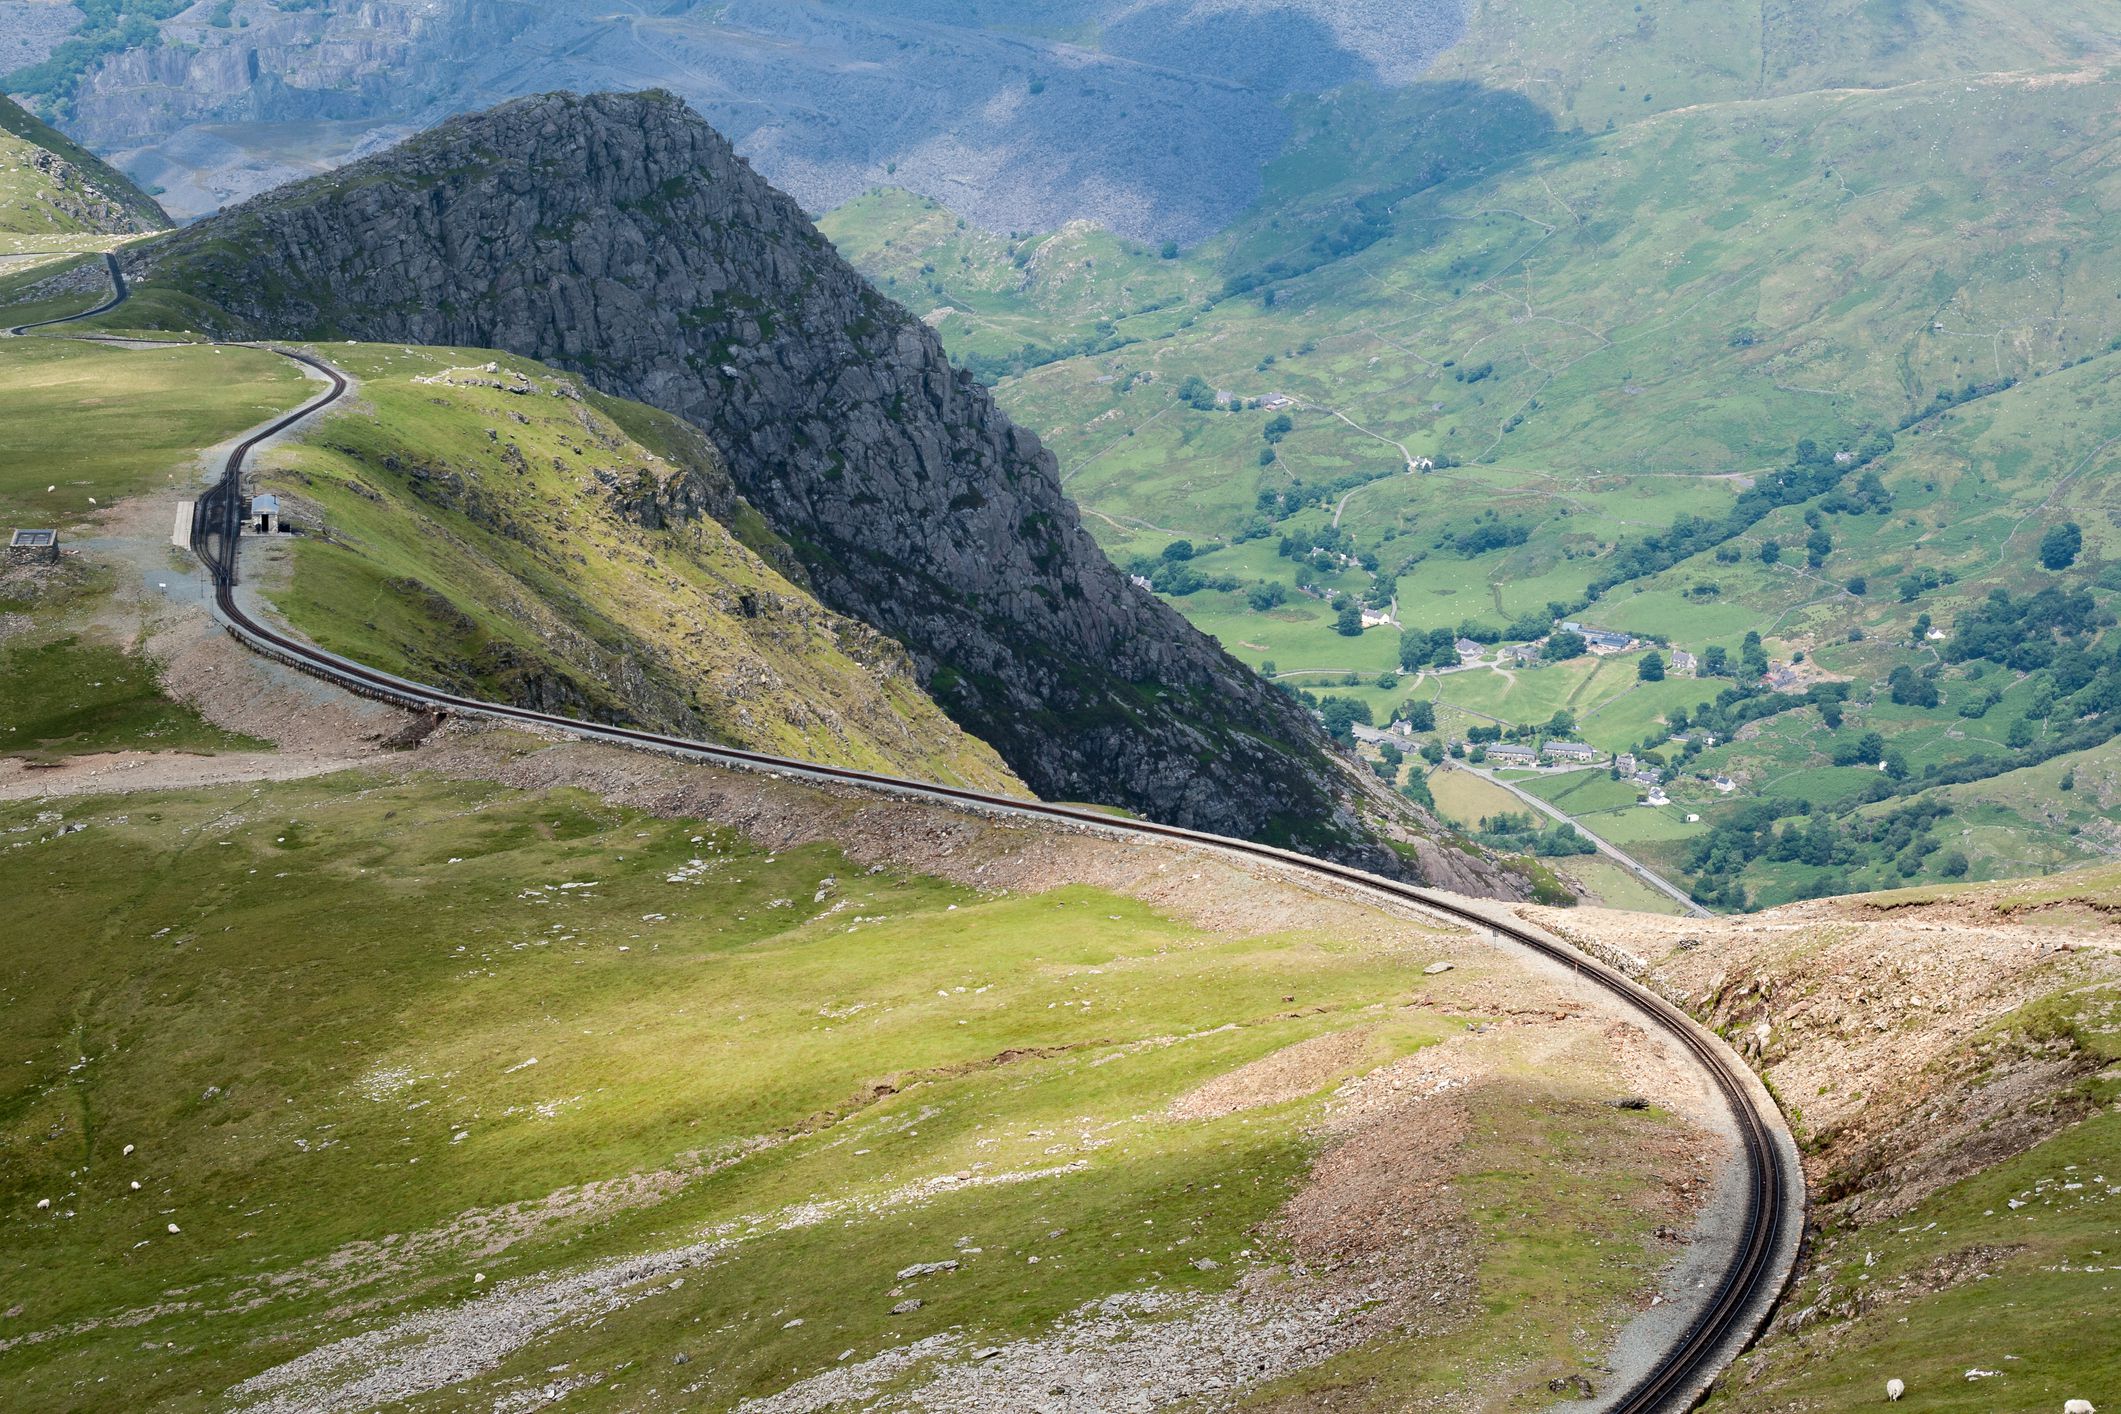 <p>For a shorter train journey with unbelievable views, consider a ride with Snowdon Mountain Railway in Wales. A small diesel carriage takes passengers nearly the whole way up to the summit of Snowdon, the highest mountain in Wales.</p><p>The journey takes about 45 minutes and ends at Clogwyn Station, where you can take time to enjoy the views of Snowdonia National Park. The park is within driving distance of Liverpool, so it could provide a welcome escape from the city if you’re interested.</p>